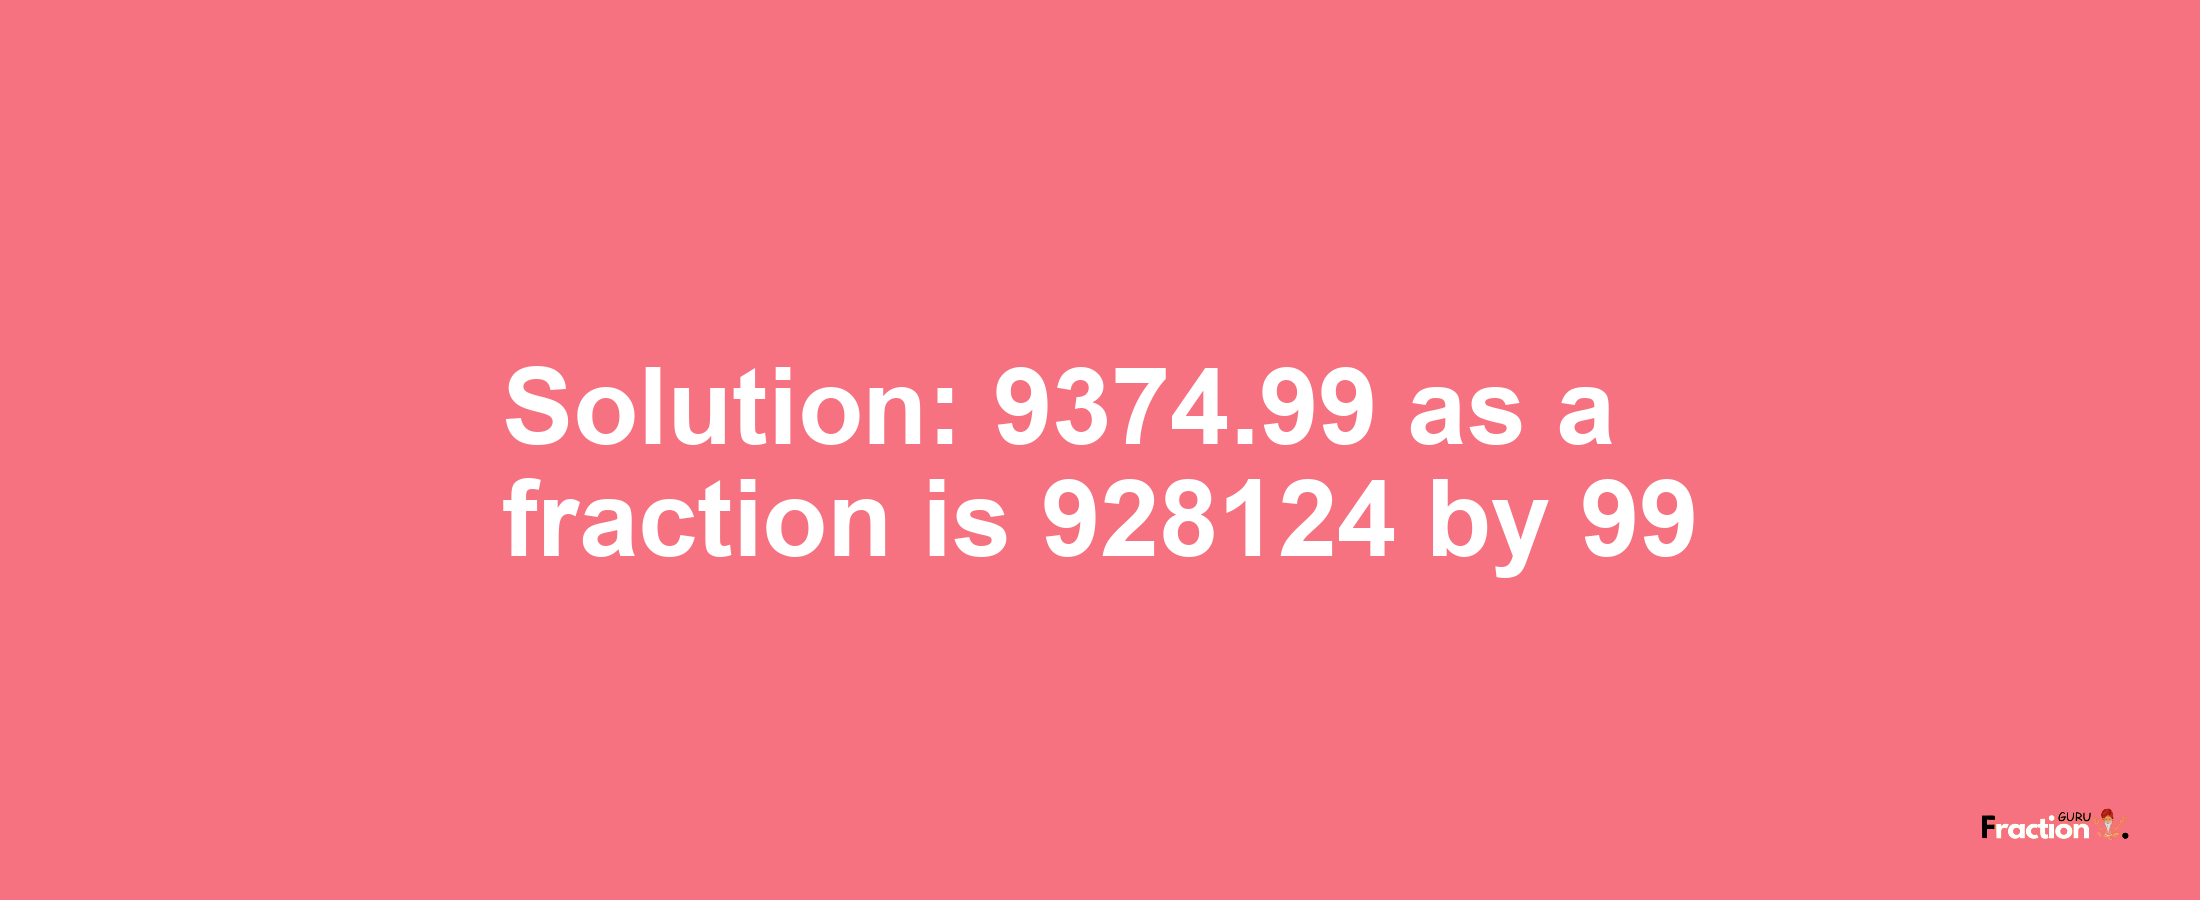 Solution:9374.99 as a fraction is 928124/99